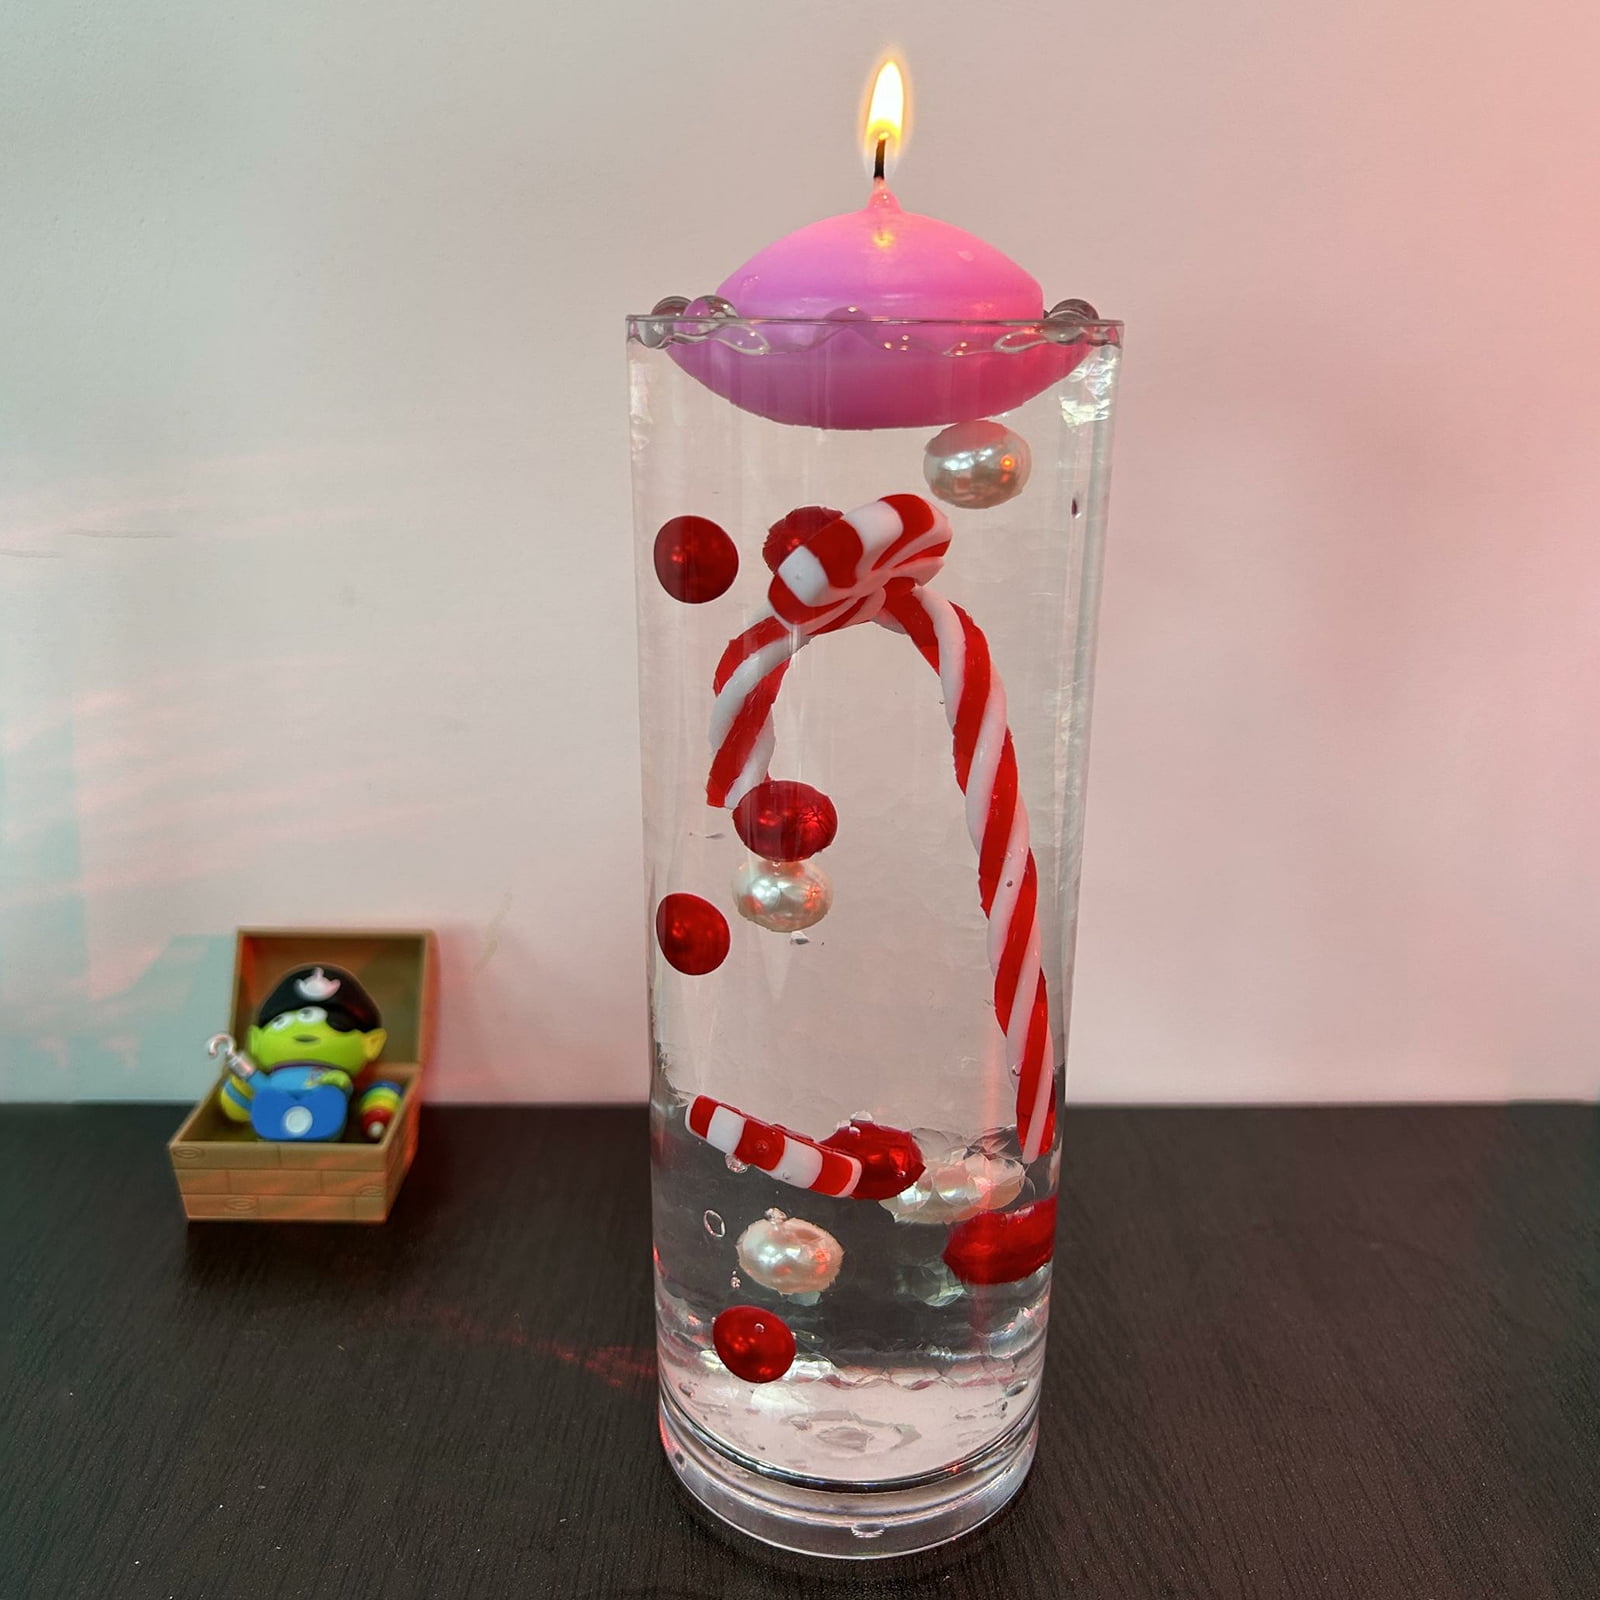 craftiviti: HOW TO MAKE A FLOATING CANDLE WITH WAX BEADS